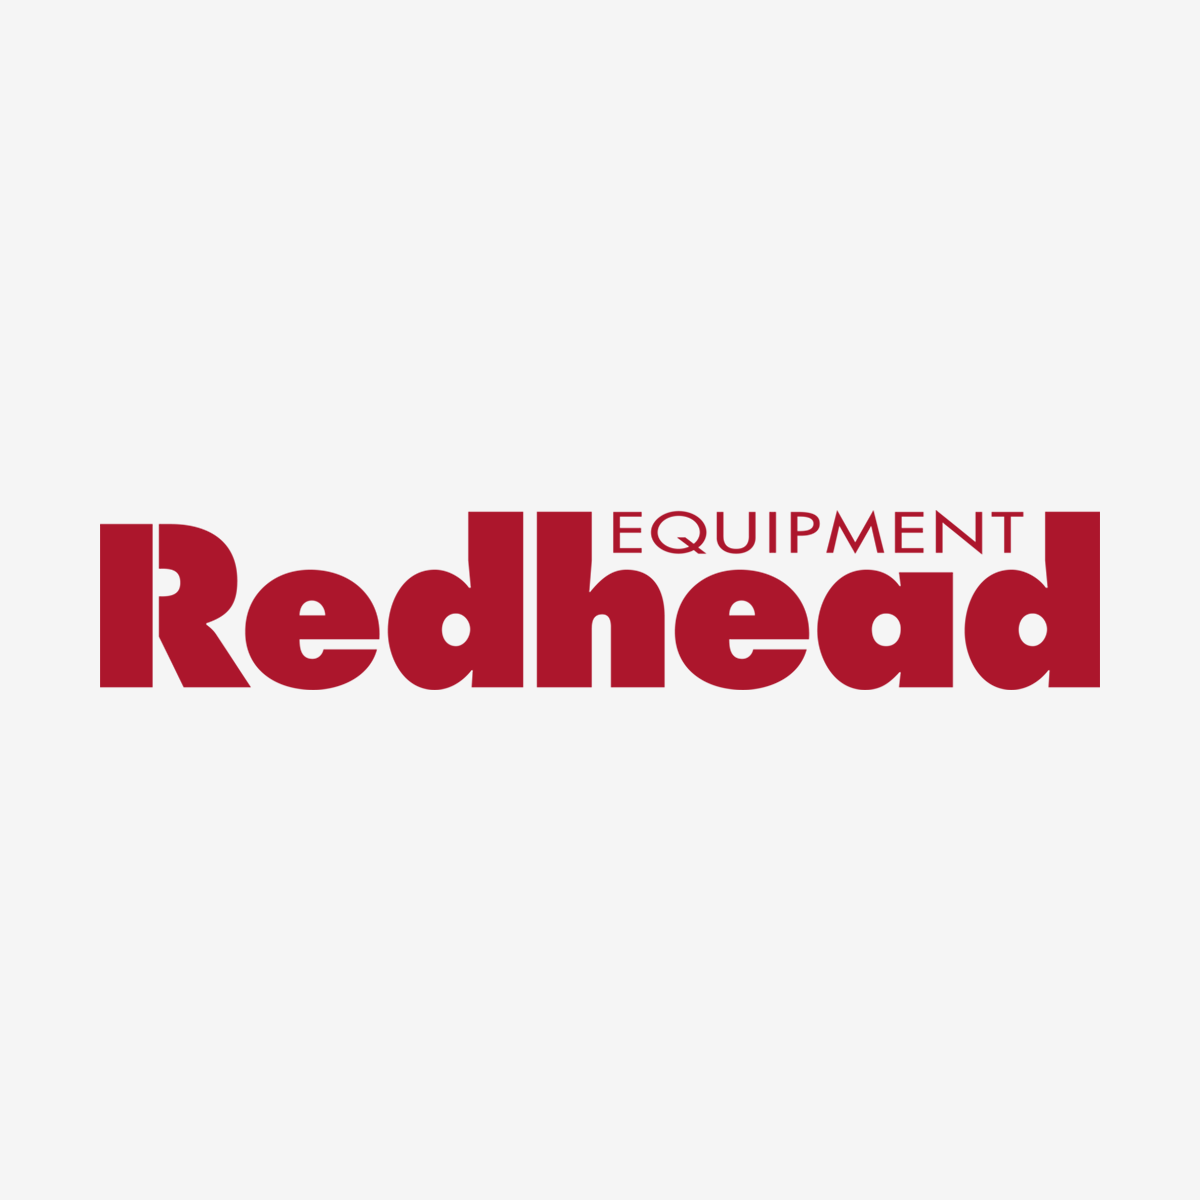 Redhead Logo - Redhead Equipment. Equipment you can count on to get the job done